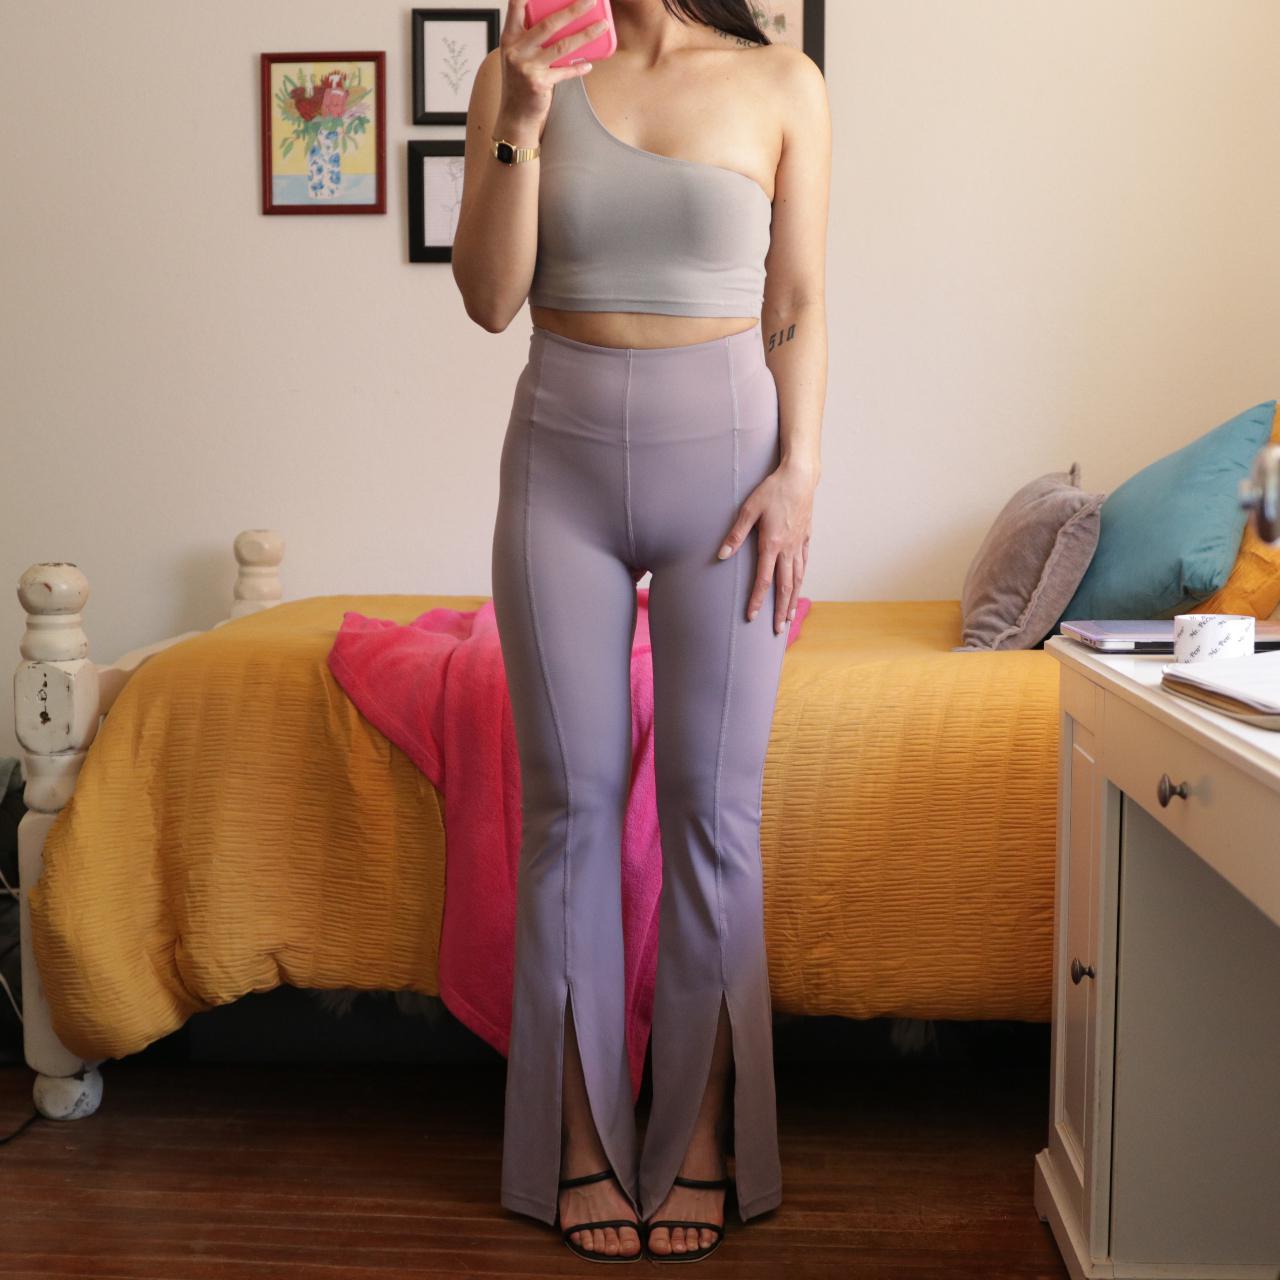 Lululemon In the Groove Slit Flare Pant in the color